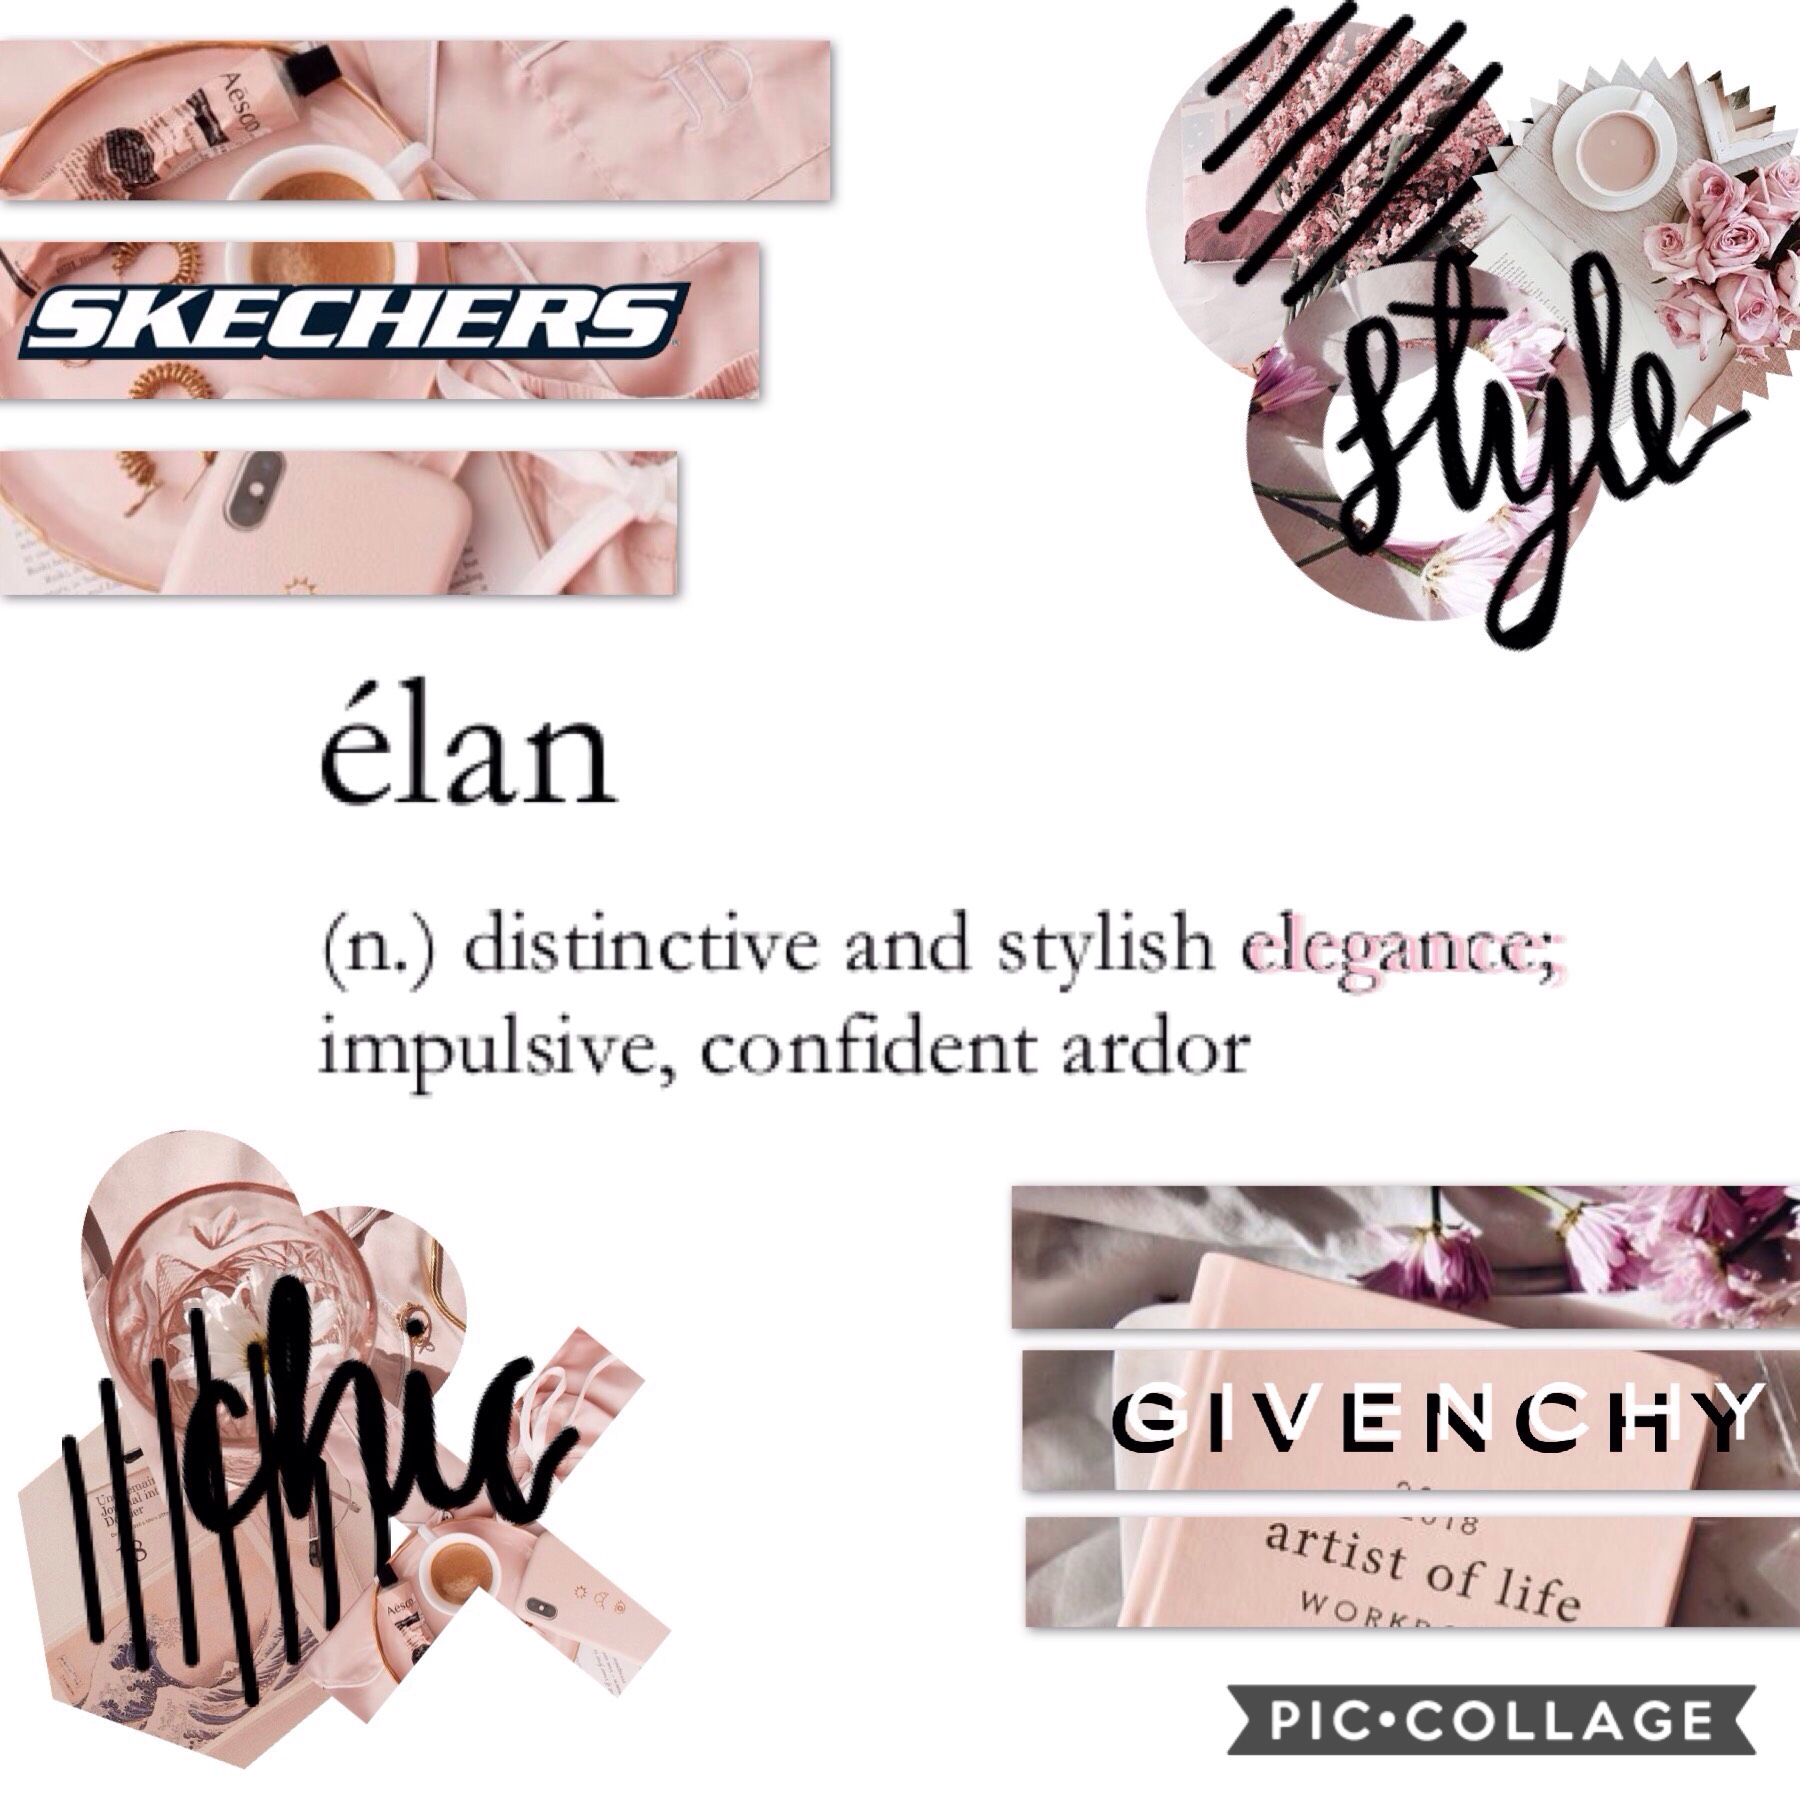 •  elan •  "distinctive and stylish elegance; impulsive, confident ardor" • 🎀☕️👛
trying to keep this caption short and sweet! more collages probably out this week and the next since I have a bit more time! I'll post soon and byeee for now! 💓 m e l •Oct1st